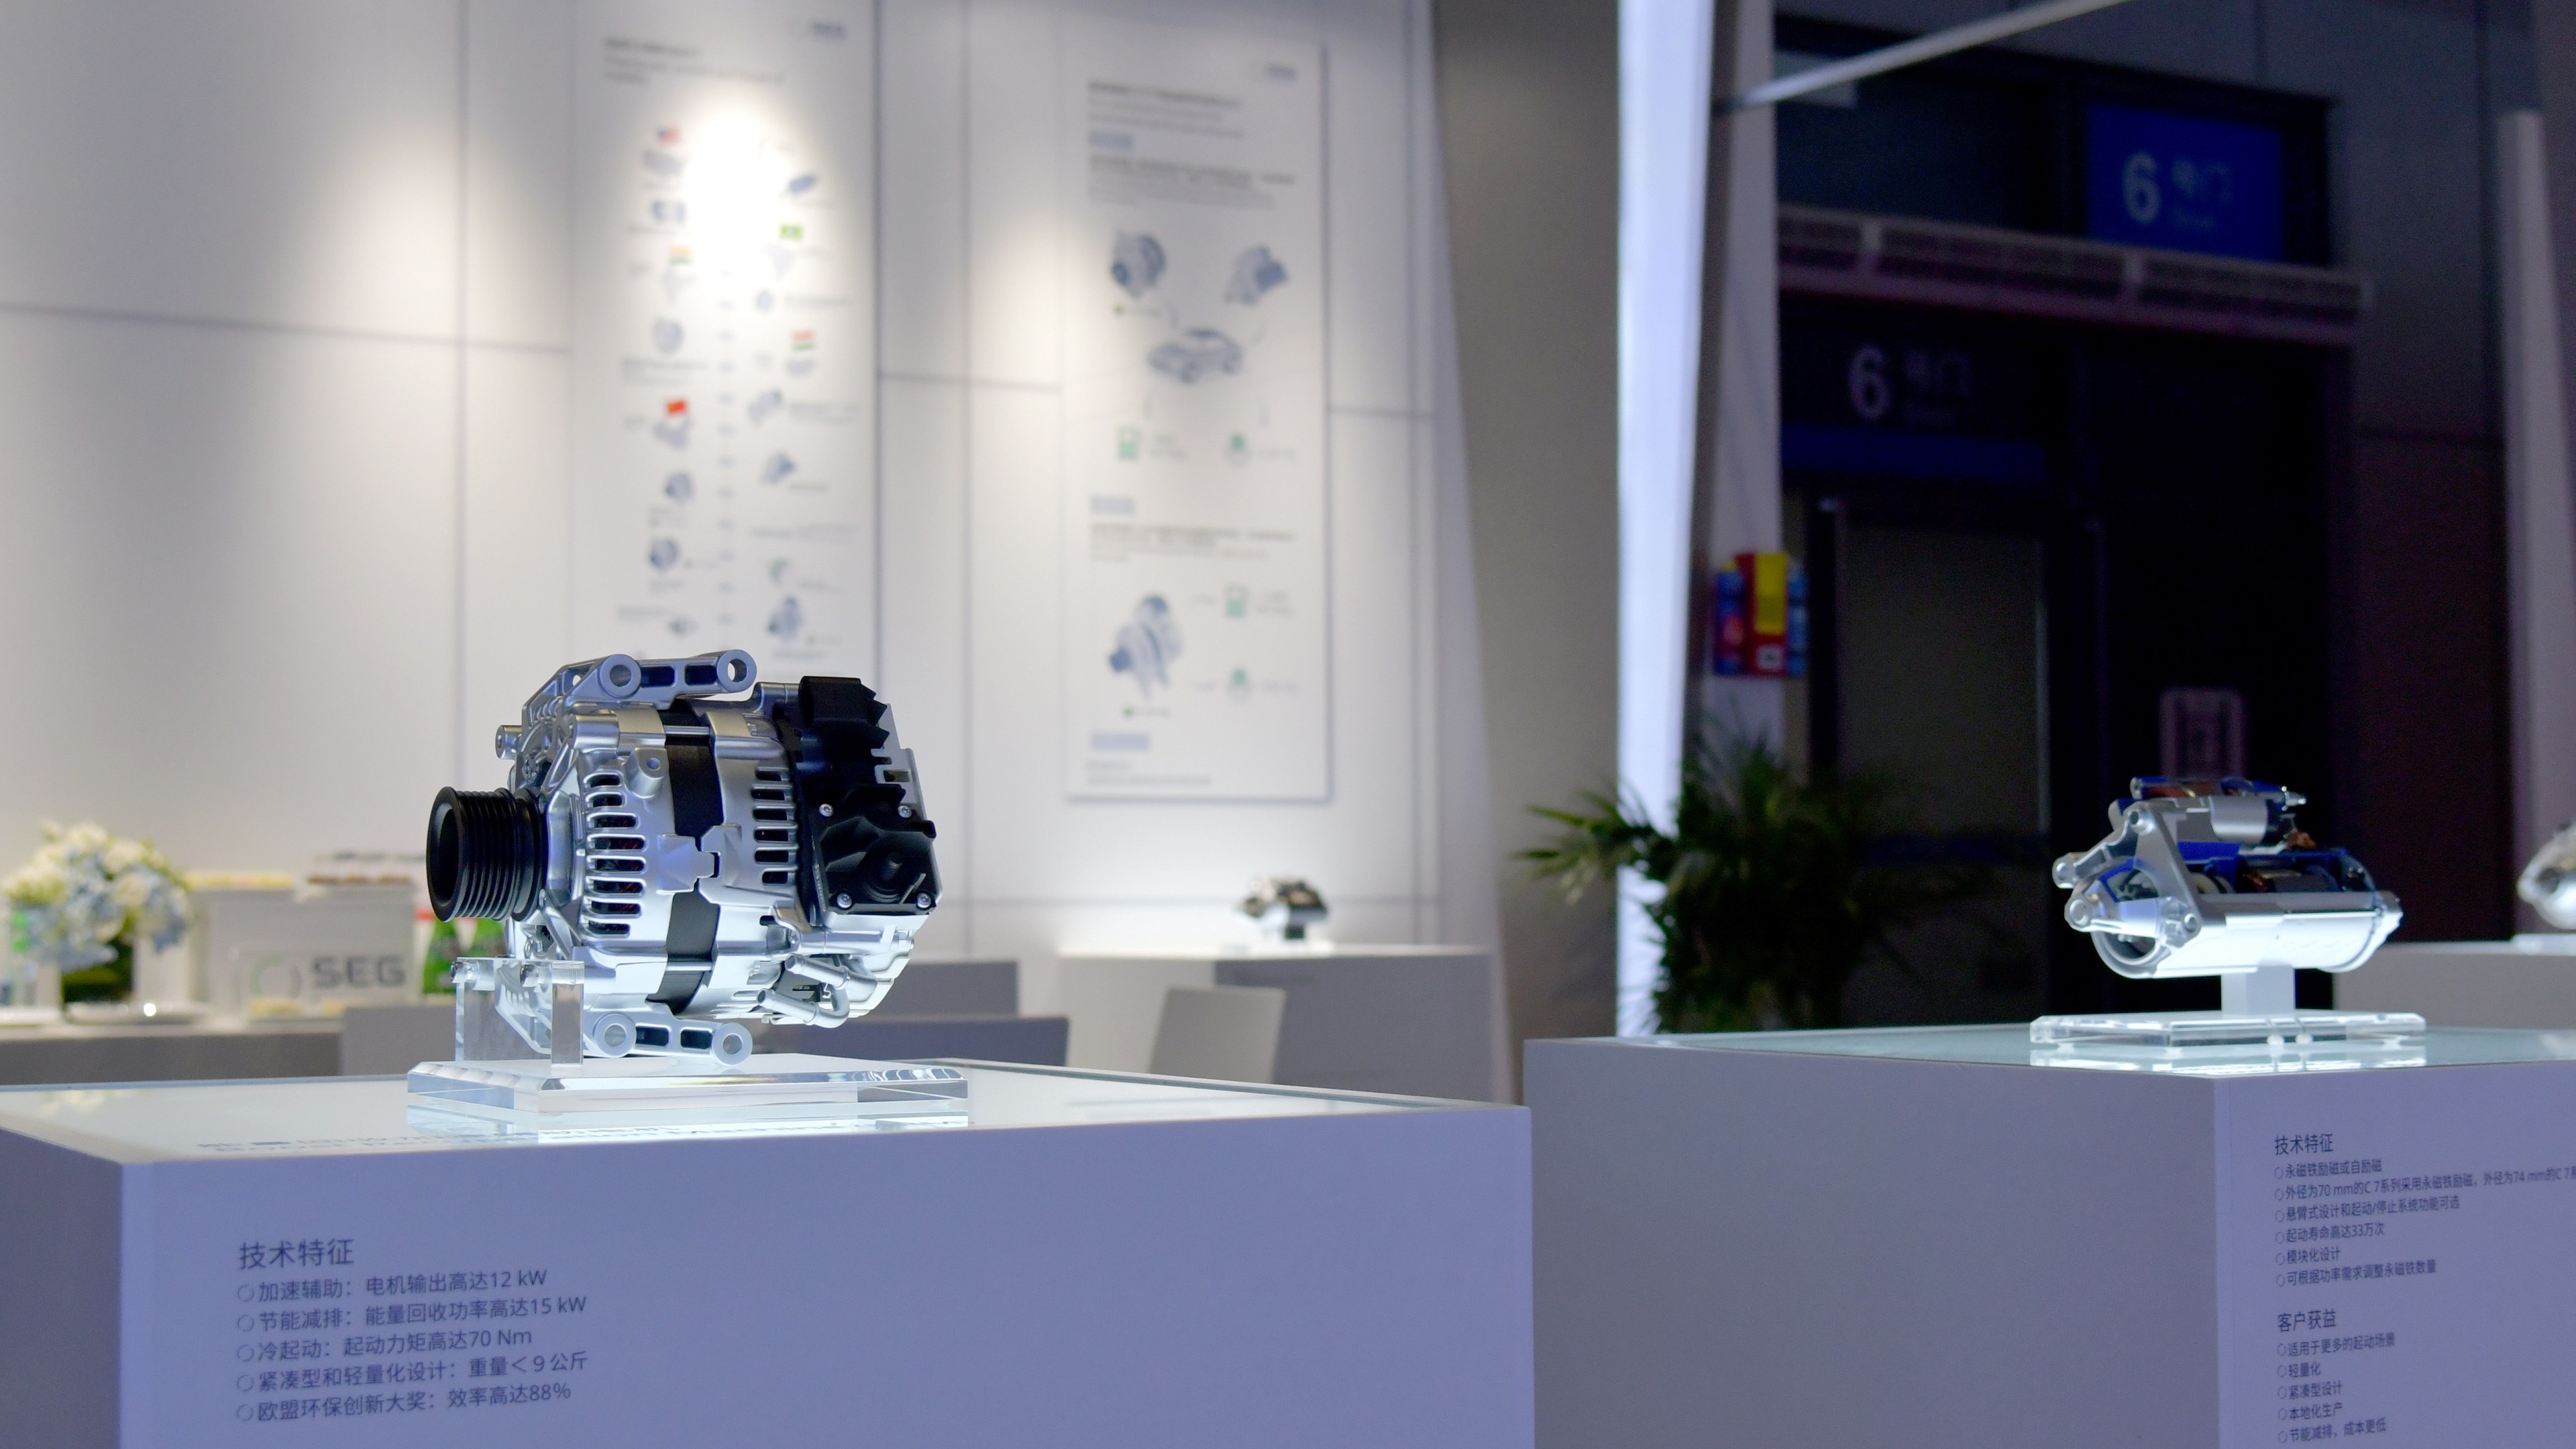 Trade show exhibits 48V BRM 2.8 and starter motor from SEG Automotive during Auto Shanghai